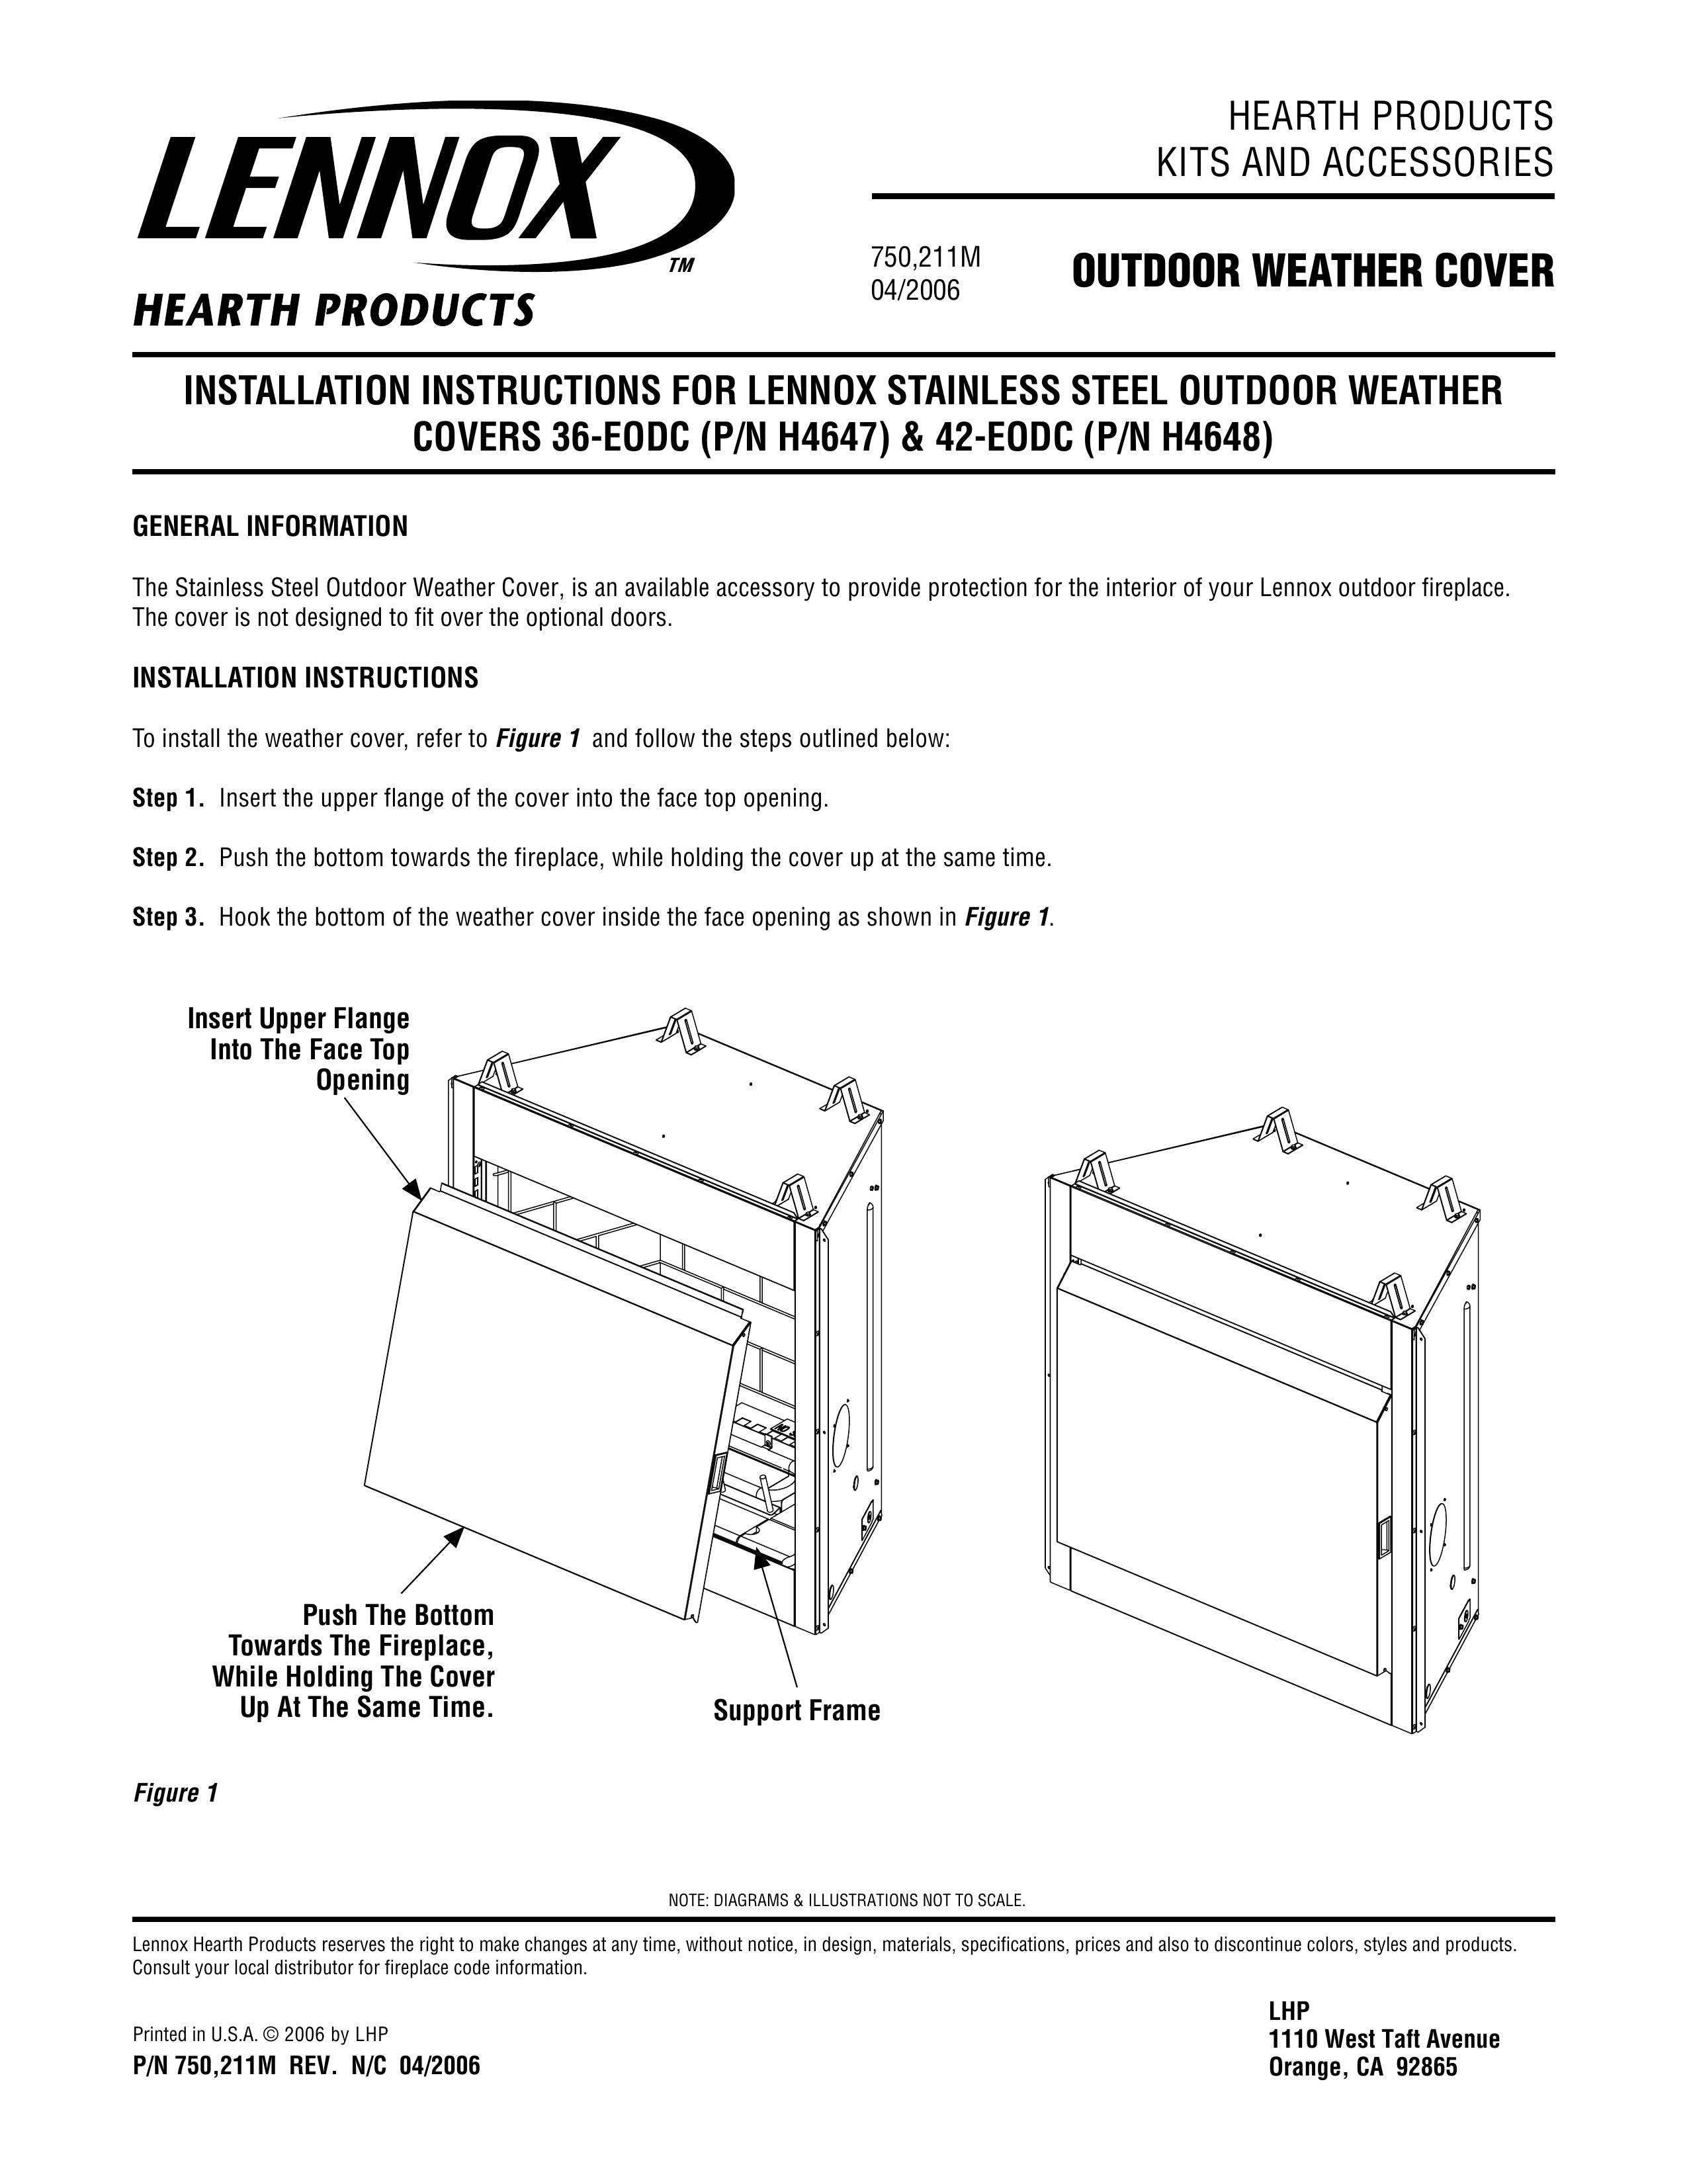 Lennox Hearth 42-EODC Outdoor Fireplace User Manual